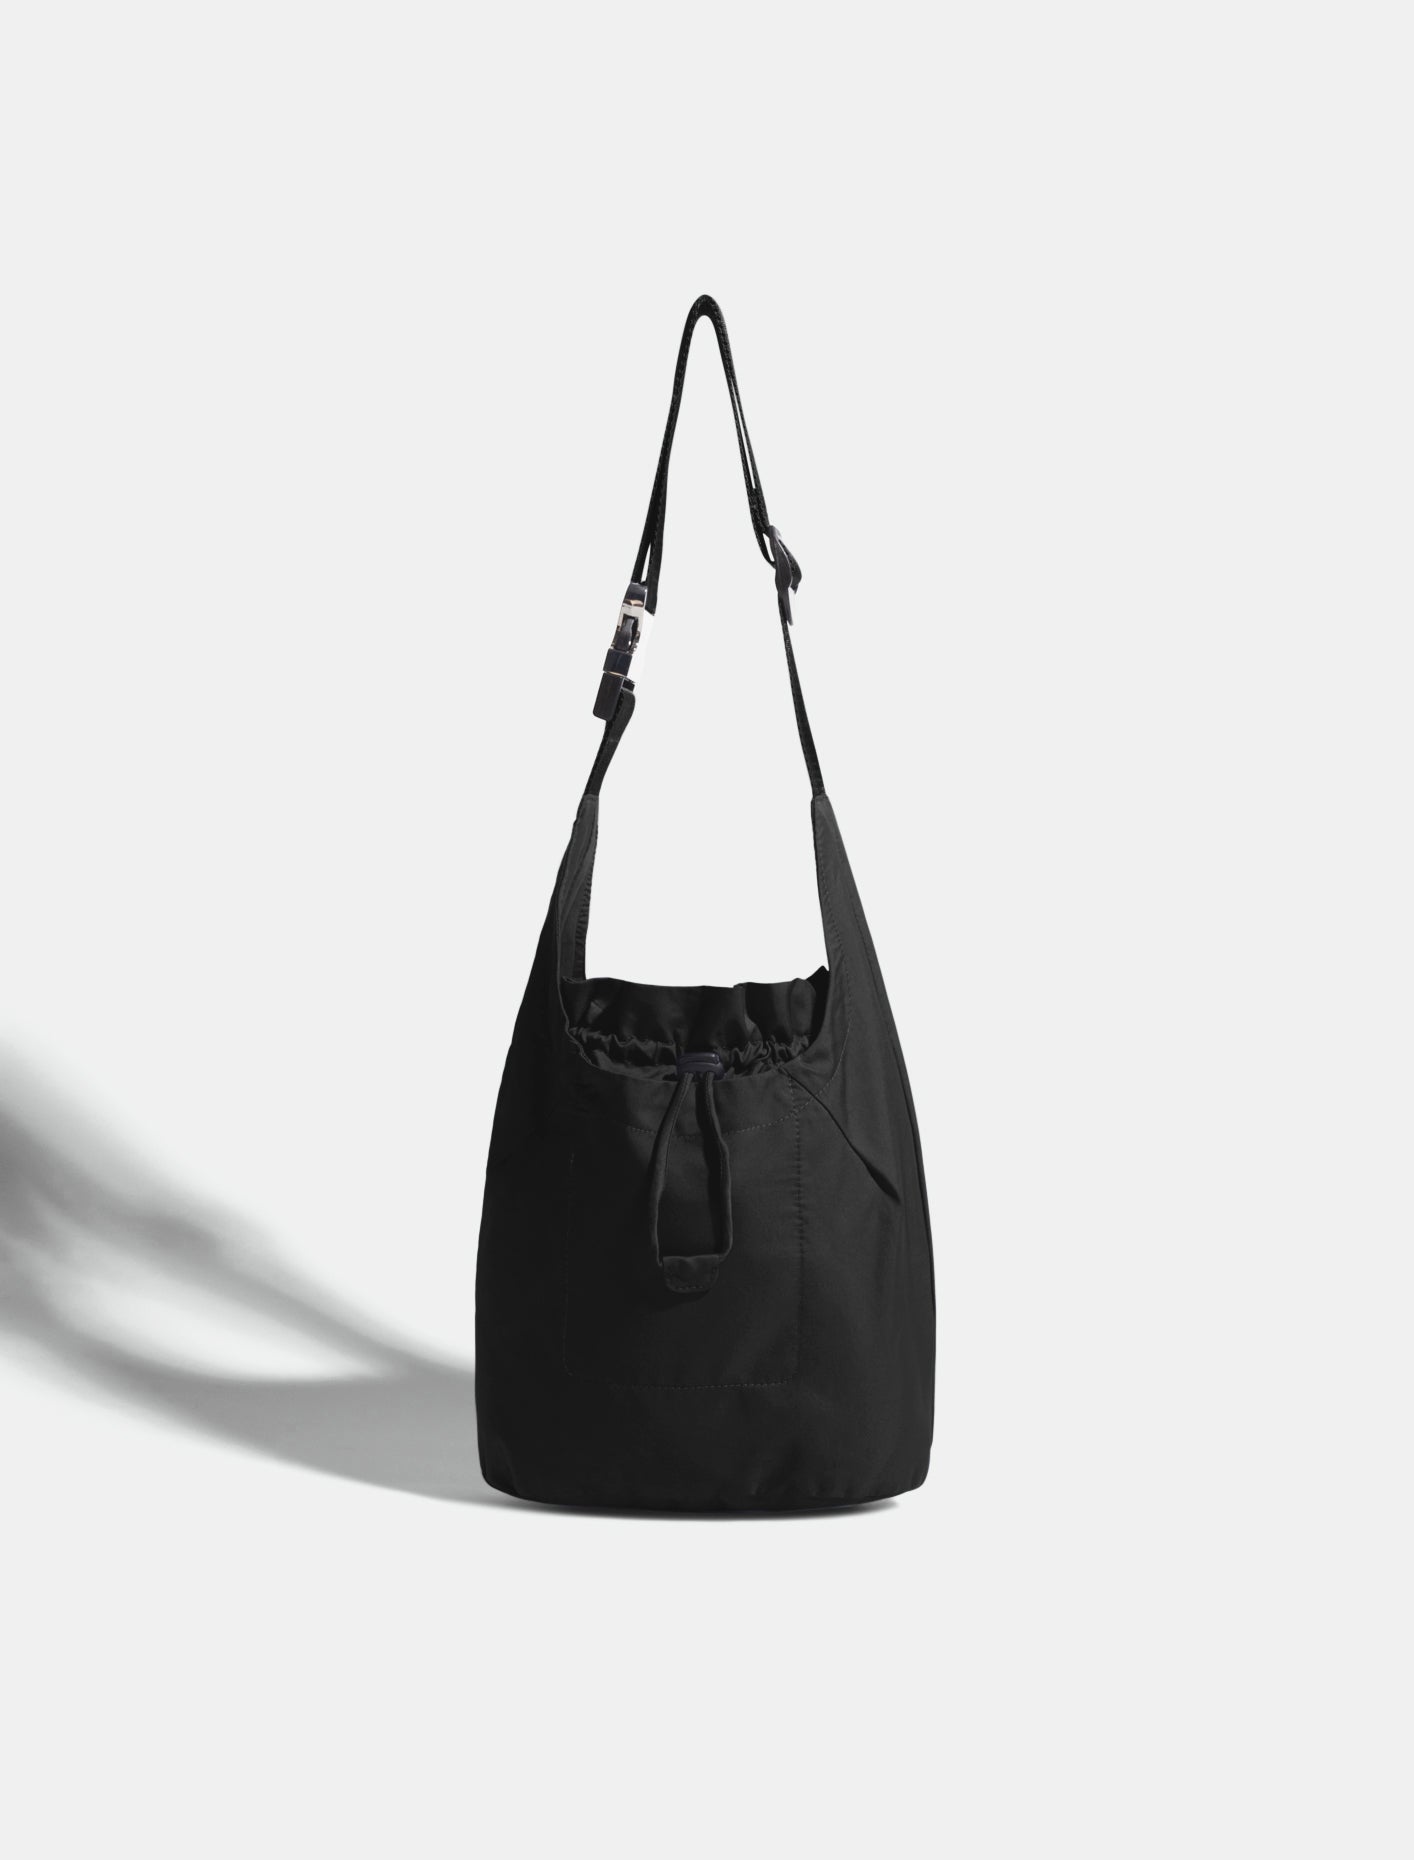 SHARP Cross body in Black Recycled Polyester